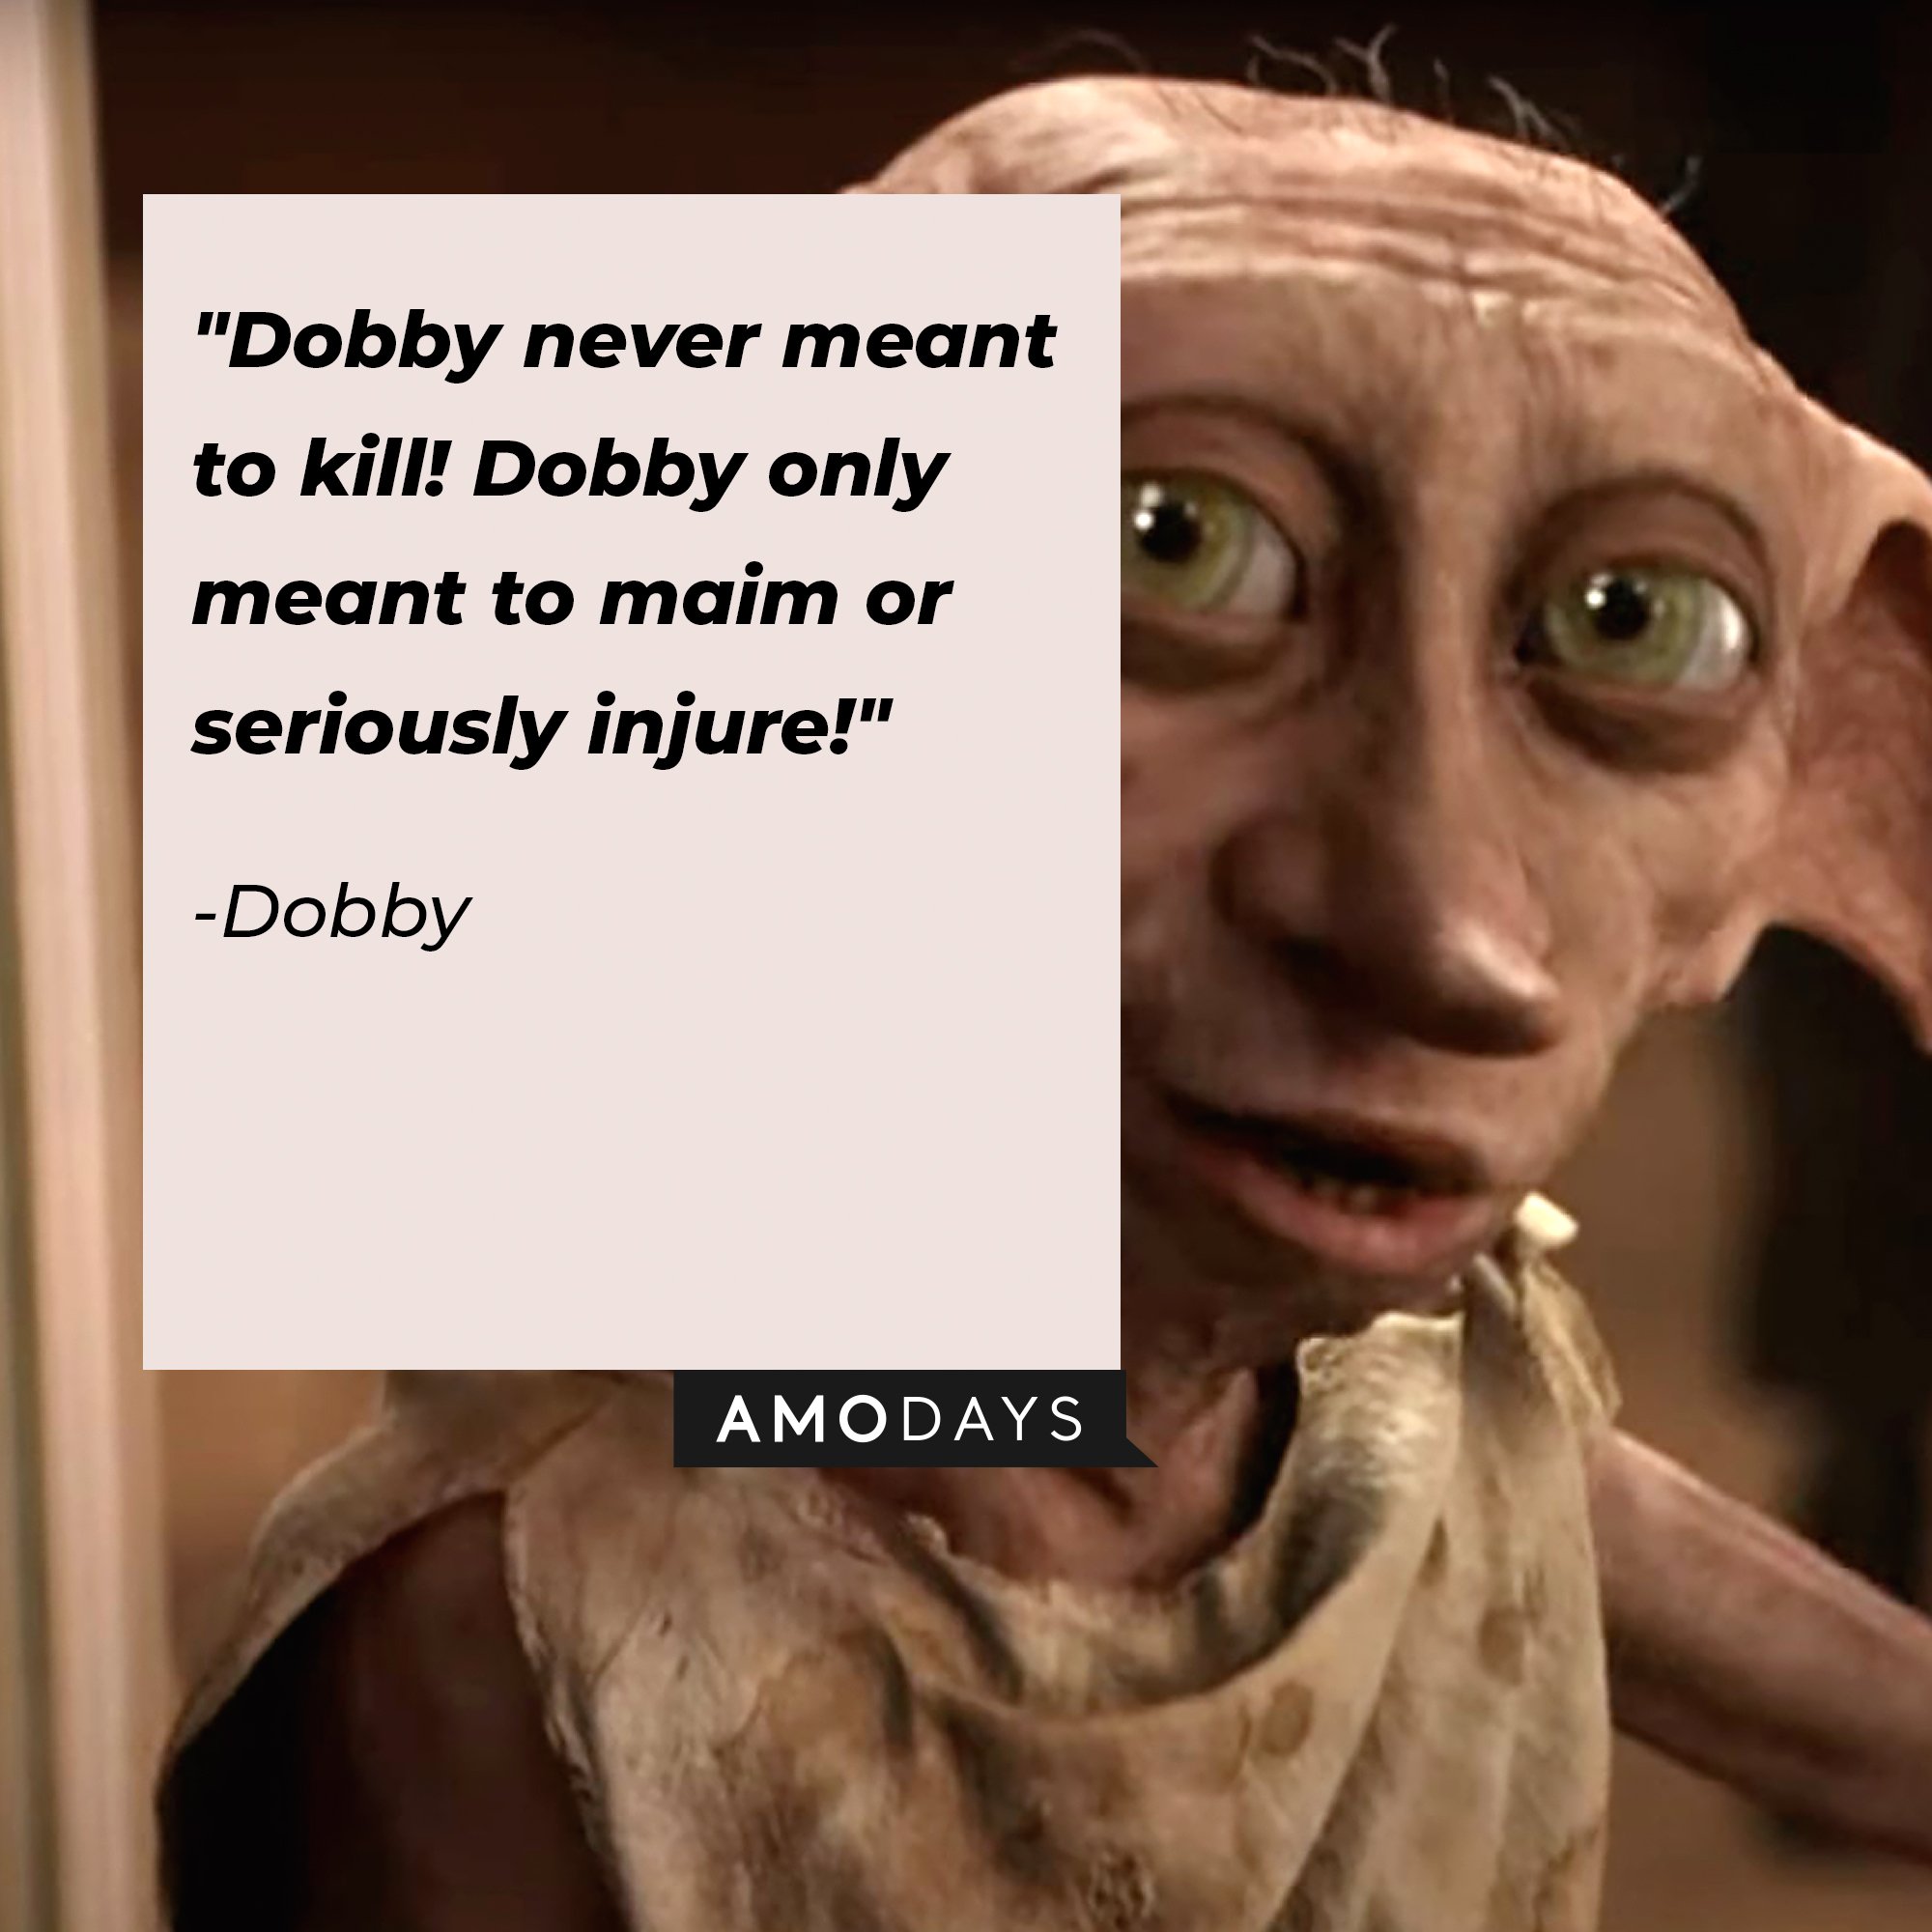 Dobby’s quote: "Dobby never meant to kill! Dobby only meant to maim or seriously injure!" | Image: AmoDays